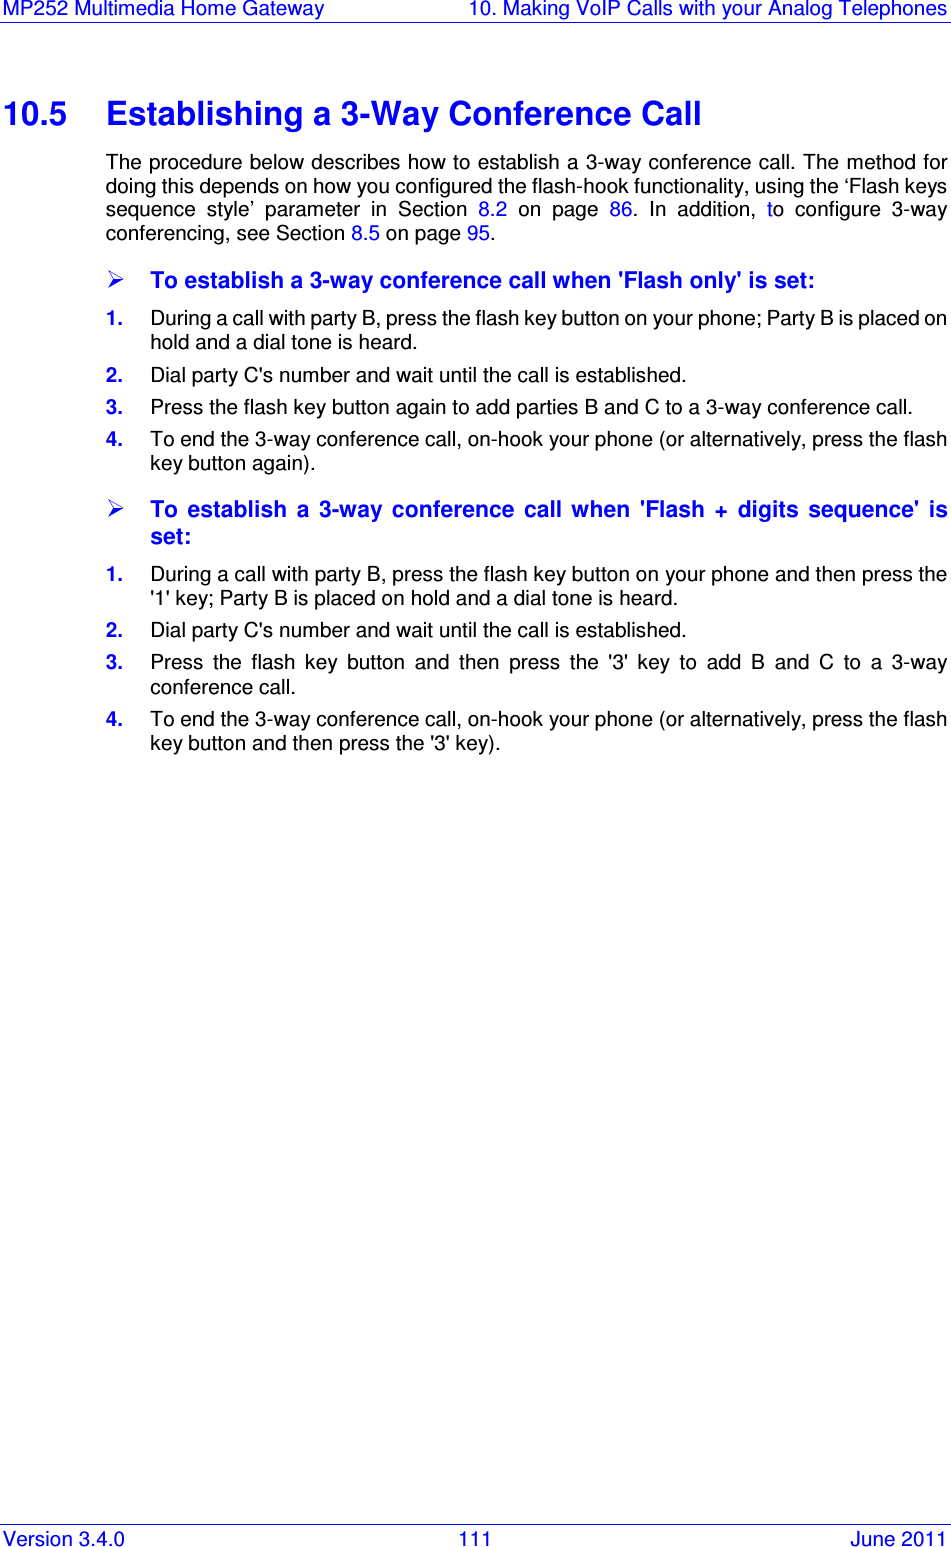 MP252 Multimedia Home Gateway  10. Making VoIP Calls with your Analog Telephones Version 3.4.0  111  June 2011 10.5  Establishing a 3-Way Conference Call The procedure below describes how to establish a 3-way conference call. The method for doing this depends on how you configured the flash-hook functionality, using the ‘Flash keys sequence  style’  parameter  in  Section  8.2  on  page  86. In  addition,  to  configure  3-way conferencing, see Section 8.5 on page 95.  To establish a 3-way conference call when &apos;Flash only&apos; is set: 1.  During a call with party B, press the flash key button on your phone; Party B is placed on hold and a dial tone is heard. 2.  Dial party C&apos;s number and wait until the call is established. 3.  Press the flash key button again to add parties B and C to a 3-way conference call. 4.  To end the 3-way conference call, on-hook your phone (or alternatively, press the flash key button again).  To establish  a  3-way conference  call  when  &apos;Flash  +  digits  sequence&apos; is set: 1.  During a call with party B, press the flash key button on your phone and then press the &apos;1&apos; key; Party B is placed on hold and a dial tone is heard. 2.  Dial party C&apos;s number and wait until the call is established. 3.  Press  the  flash  key  button  and  then  press  the  &apos;3&apos;  key  to  add  B  and  C  to  a  3-way conference call. 4.  To end the 3-way conference call, on-hook your phone (or alternatively, press the flash key button and then press the &apos;3&apos; key).   